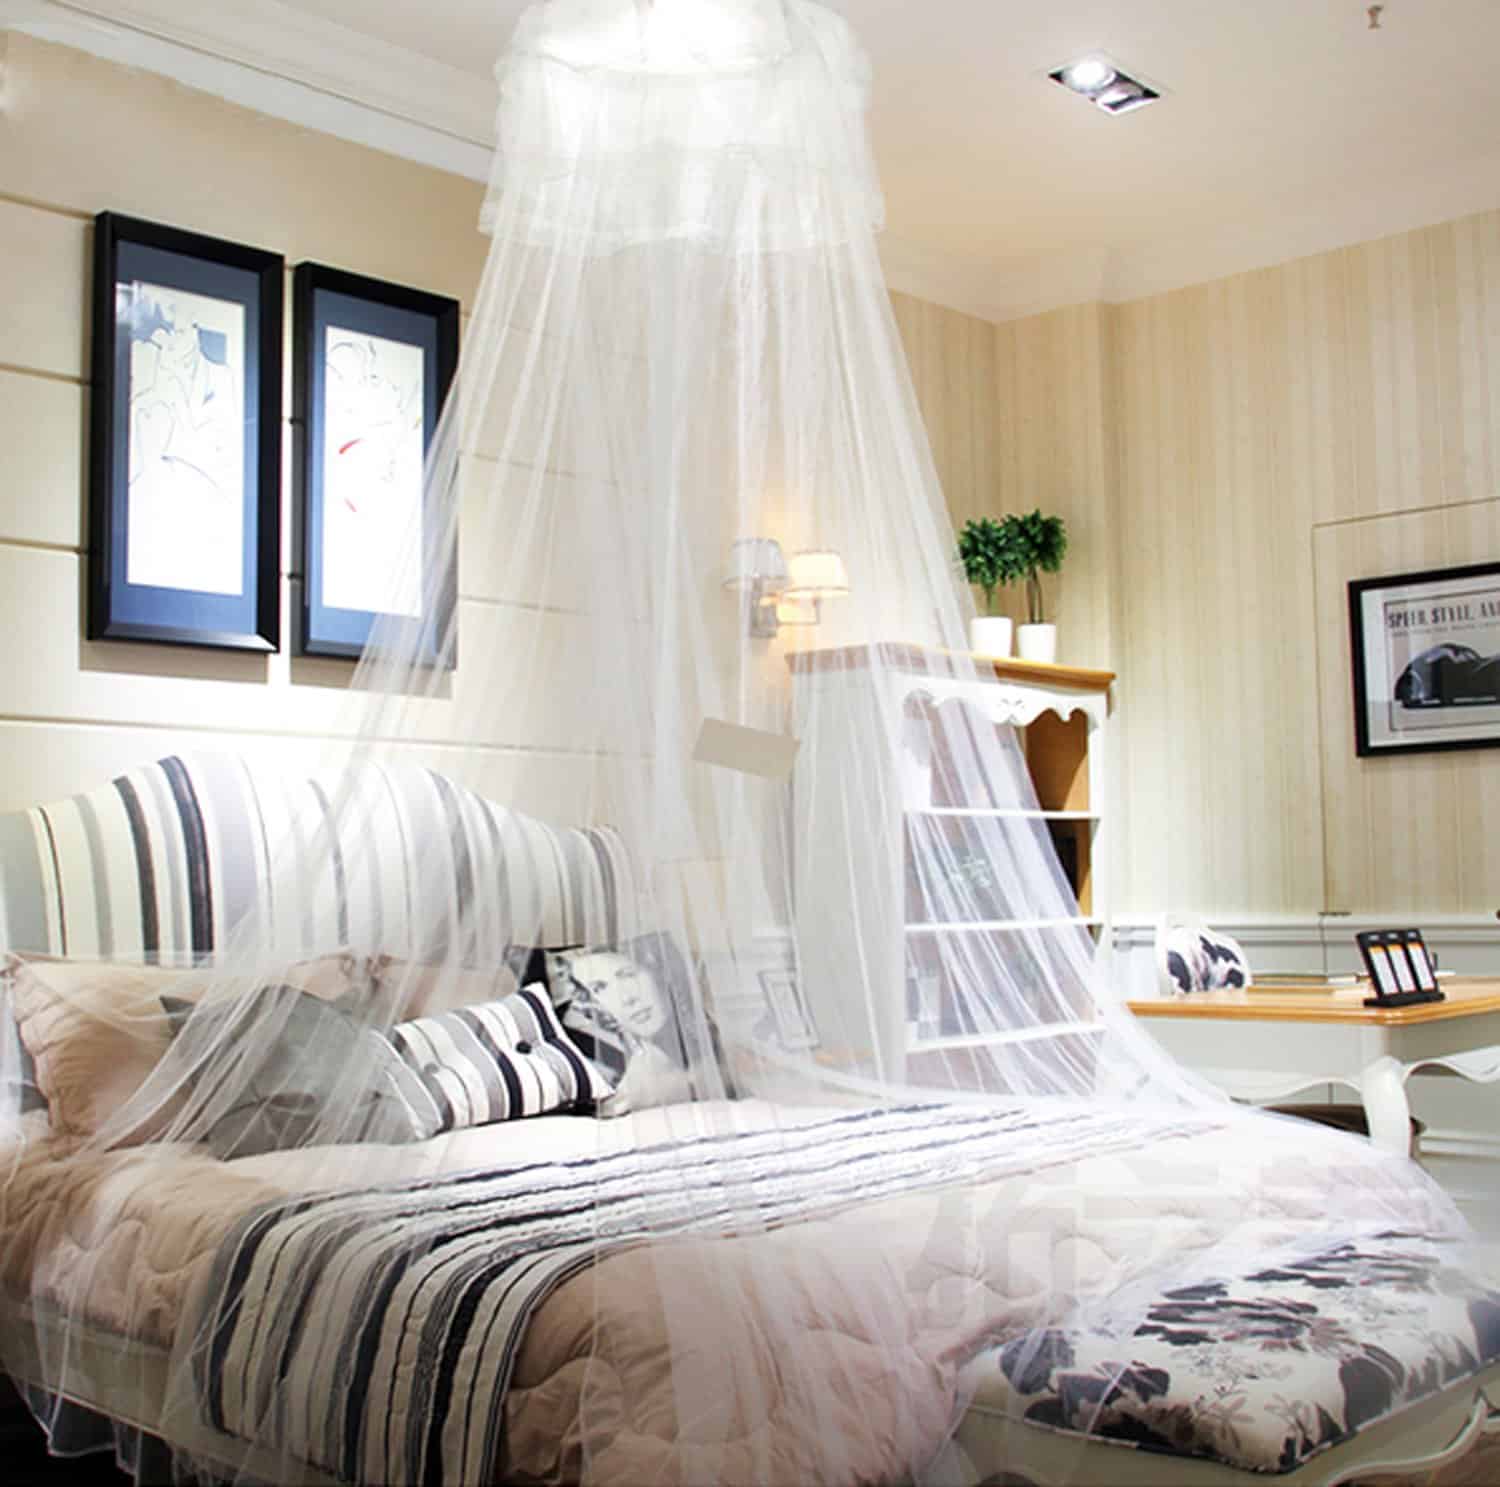 HIG mosquito net Bed Canopy